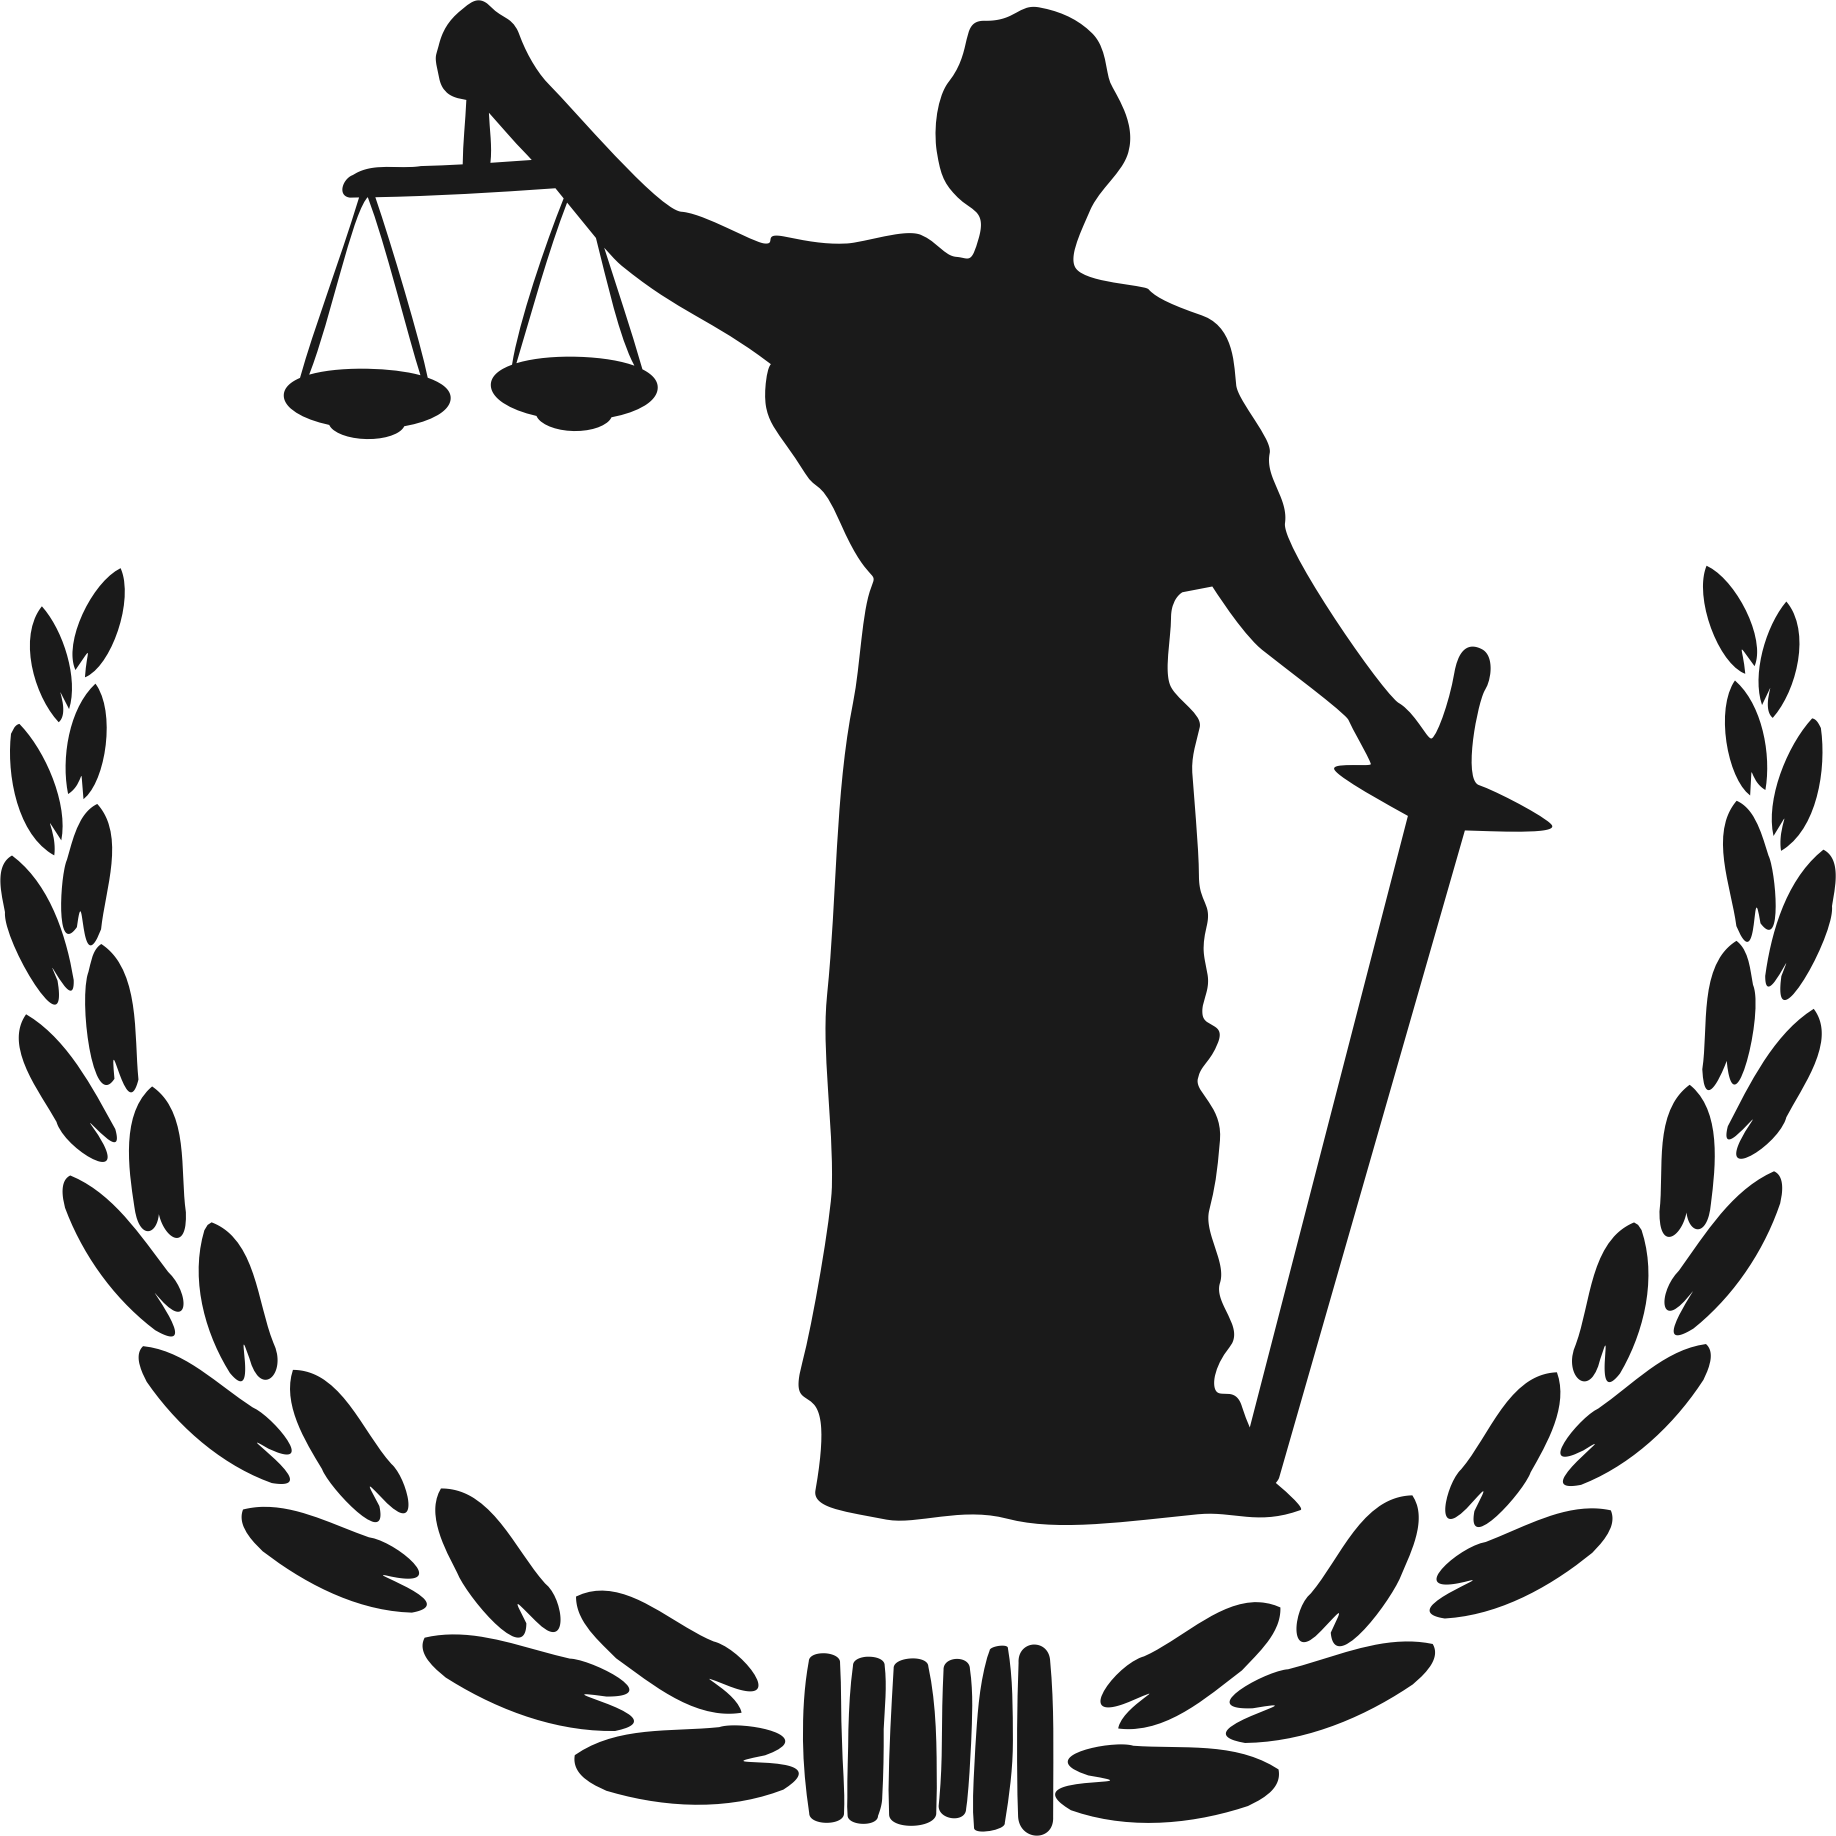 Where now for the. Laws clipart judicial power